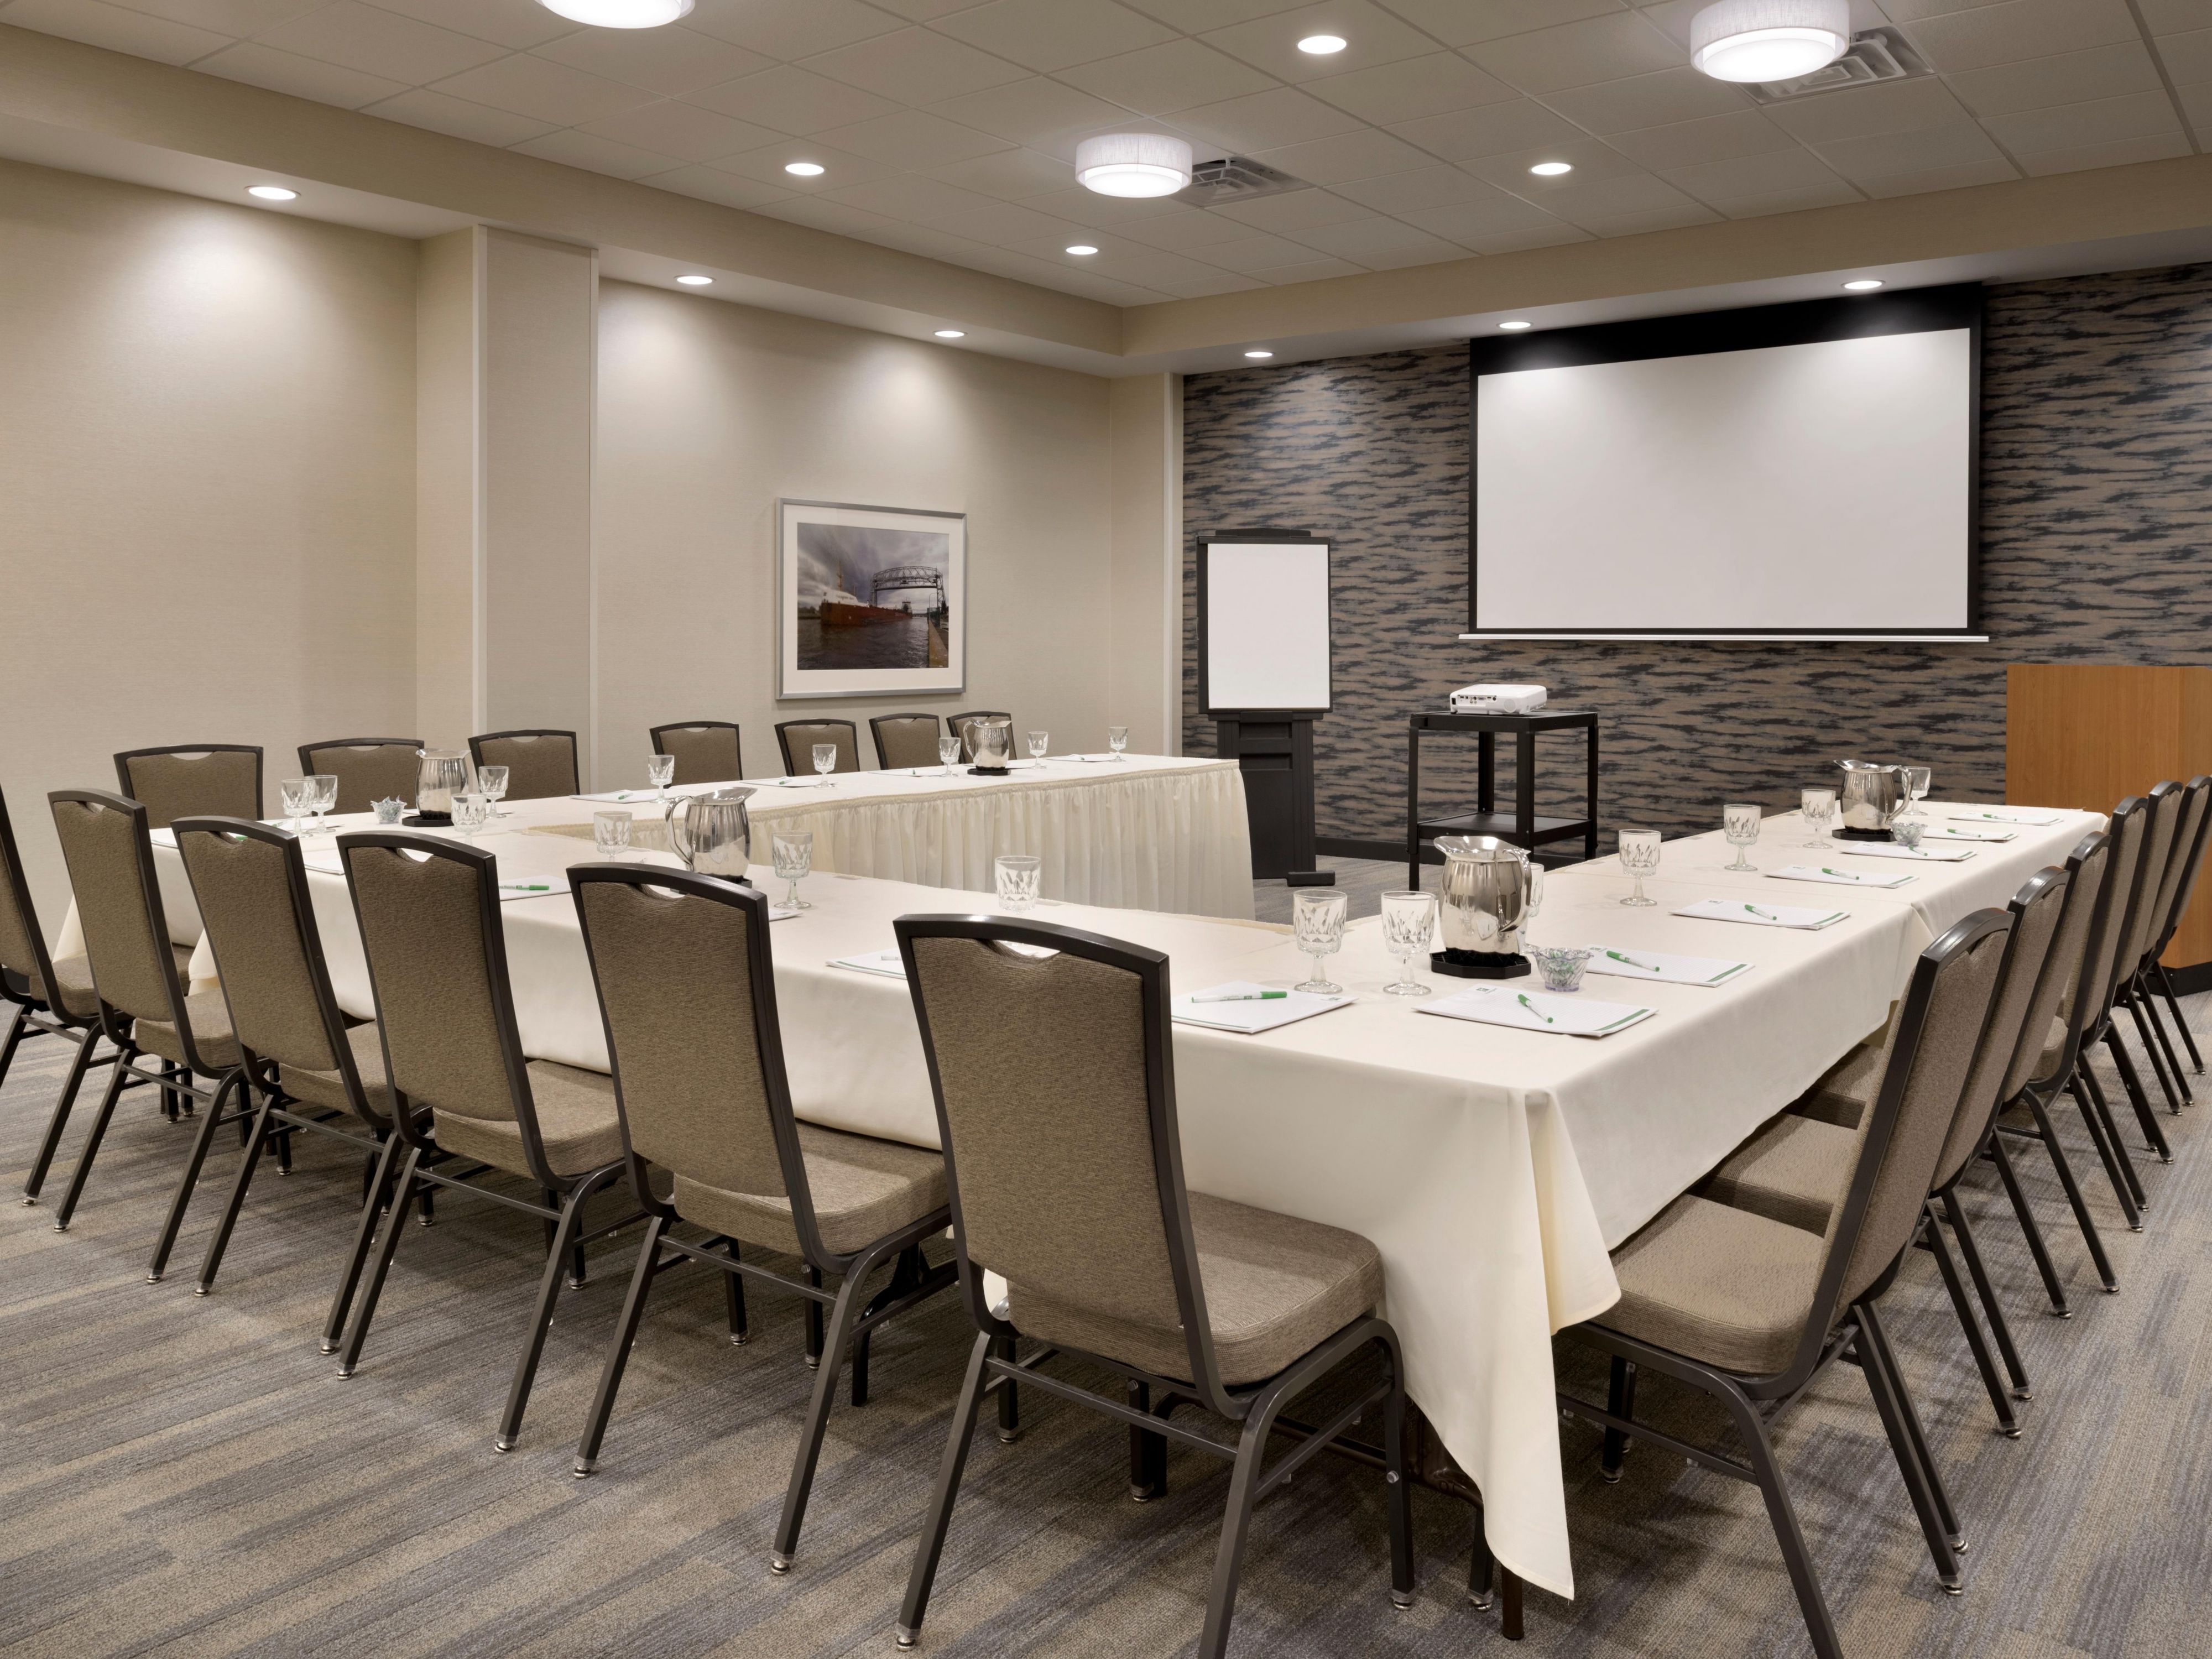 As Duluth’s largest full-service hotel and event center, we are committed to making your meeting and your stay with us as pleasurable as possible. Whether it is a business meeting, convention or retirement party, your group will have everything it needs for a great get-together. 